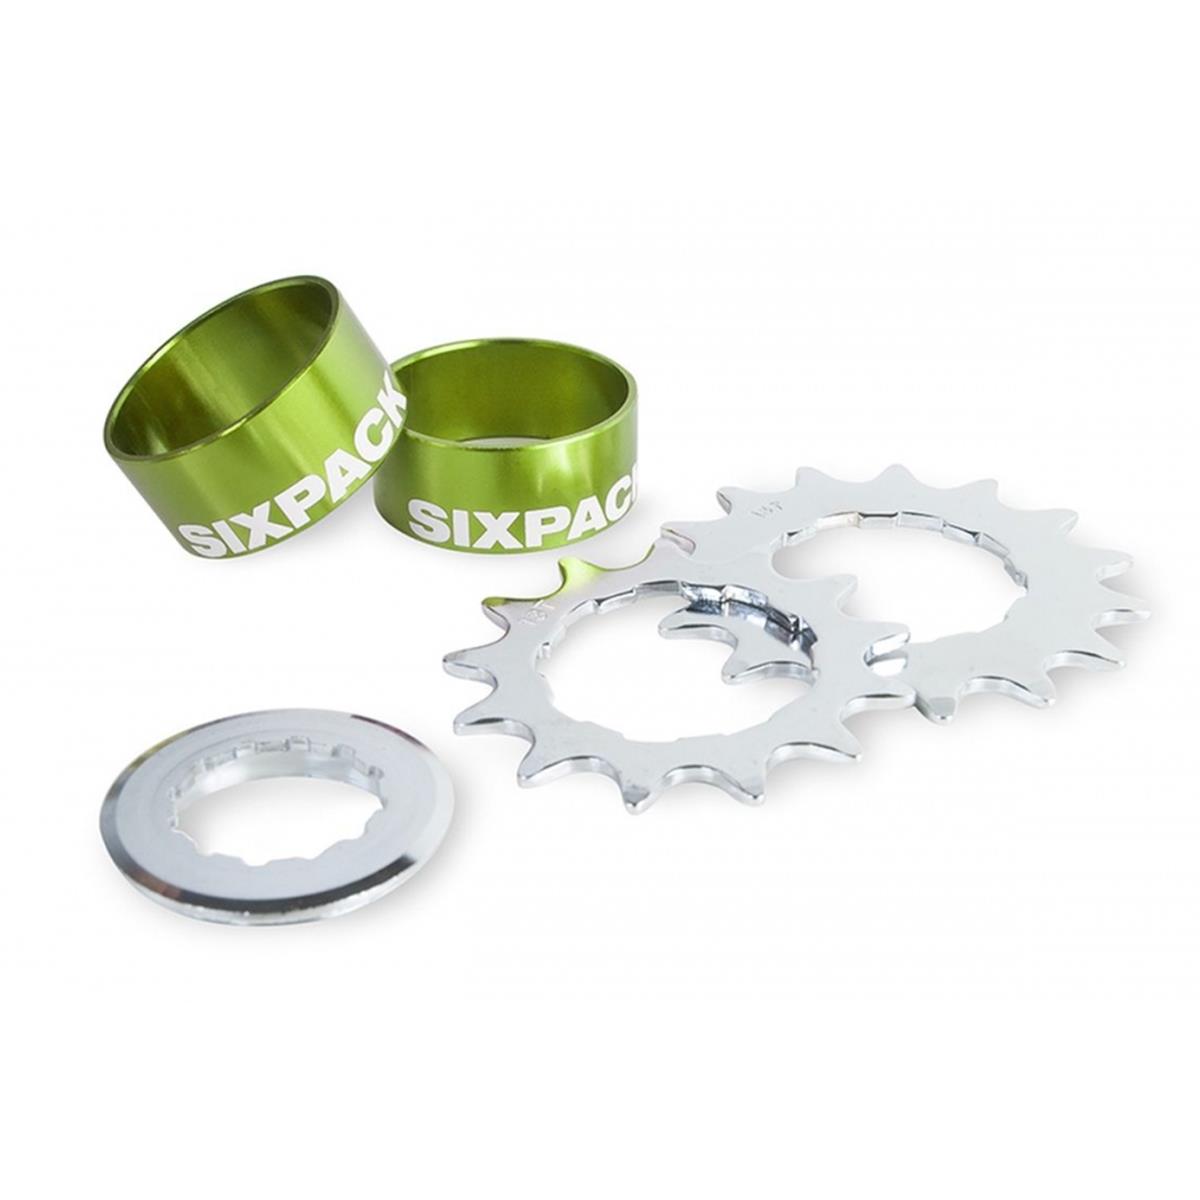 Sixpack Kit conversione Single Speed  Electric Green, incl. 2 Chainrings (13 & 15T), fits 8/9710-speed Shimano/Sram Freewheels